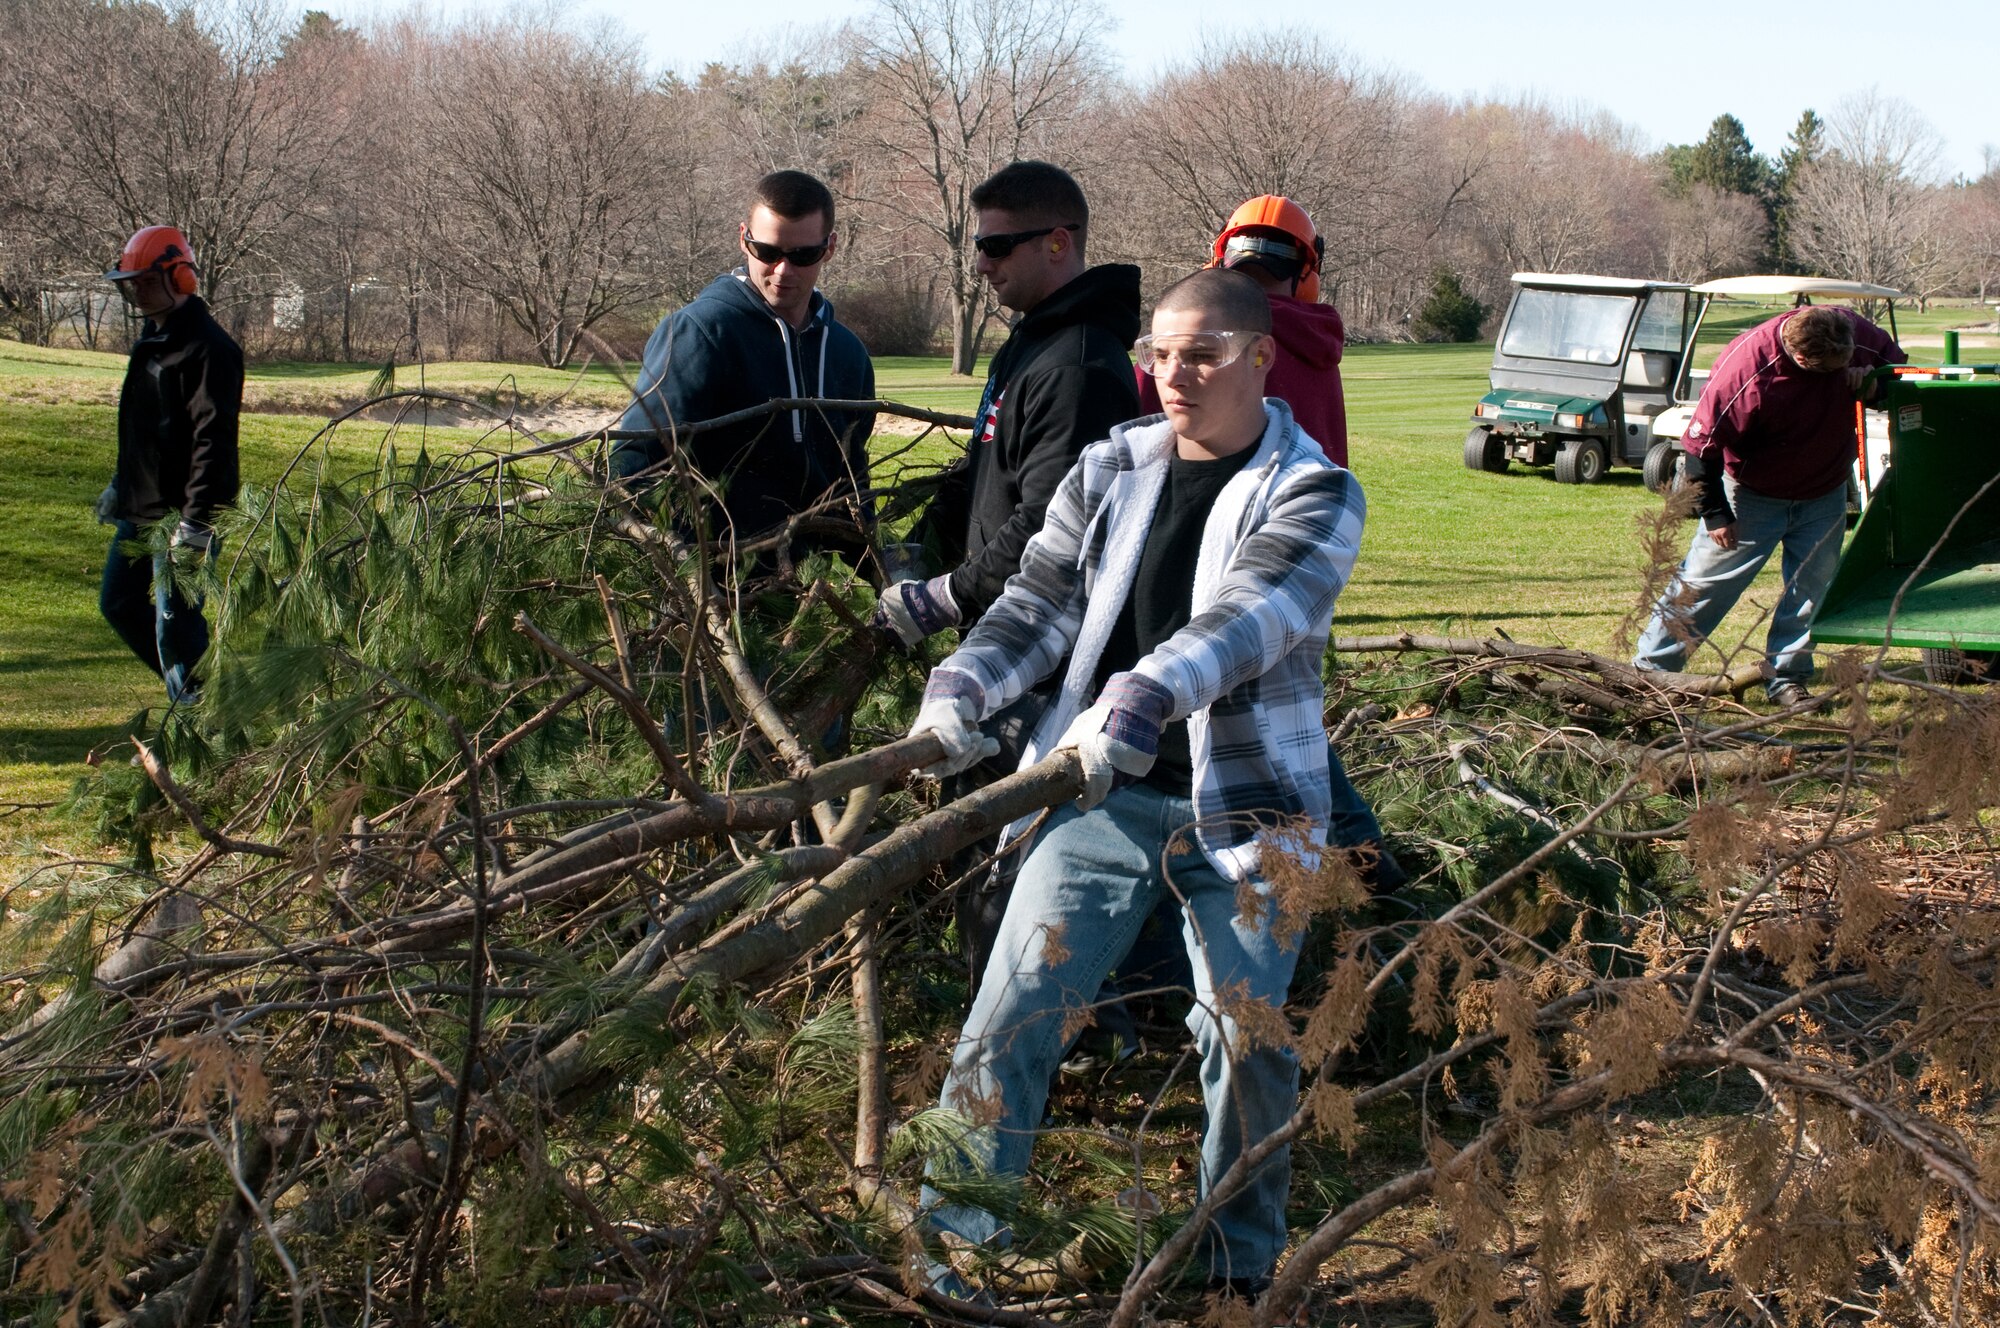 HANSCOM AIR FORCE BASE, Mass. -- Airman 1st Class Ryan Springer (front), along with other volunteers, move brush to a wood chipper that will be recycled as mulch around the Patiort Golf Course March 27. Volunteers from the Patriot Enlisted Association helped with a project to clean up the golf course and prepare it for opening day April 6. (U.S. Air Force Photo by Mark Herlihy)